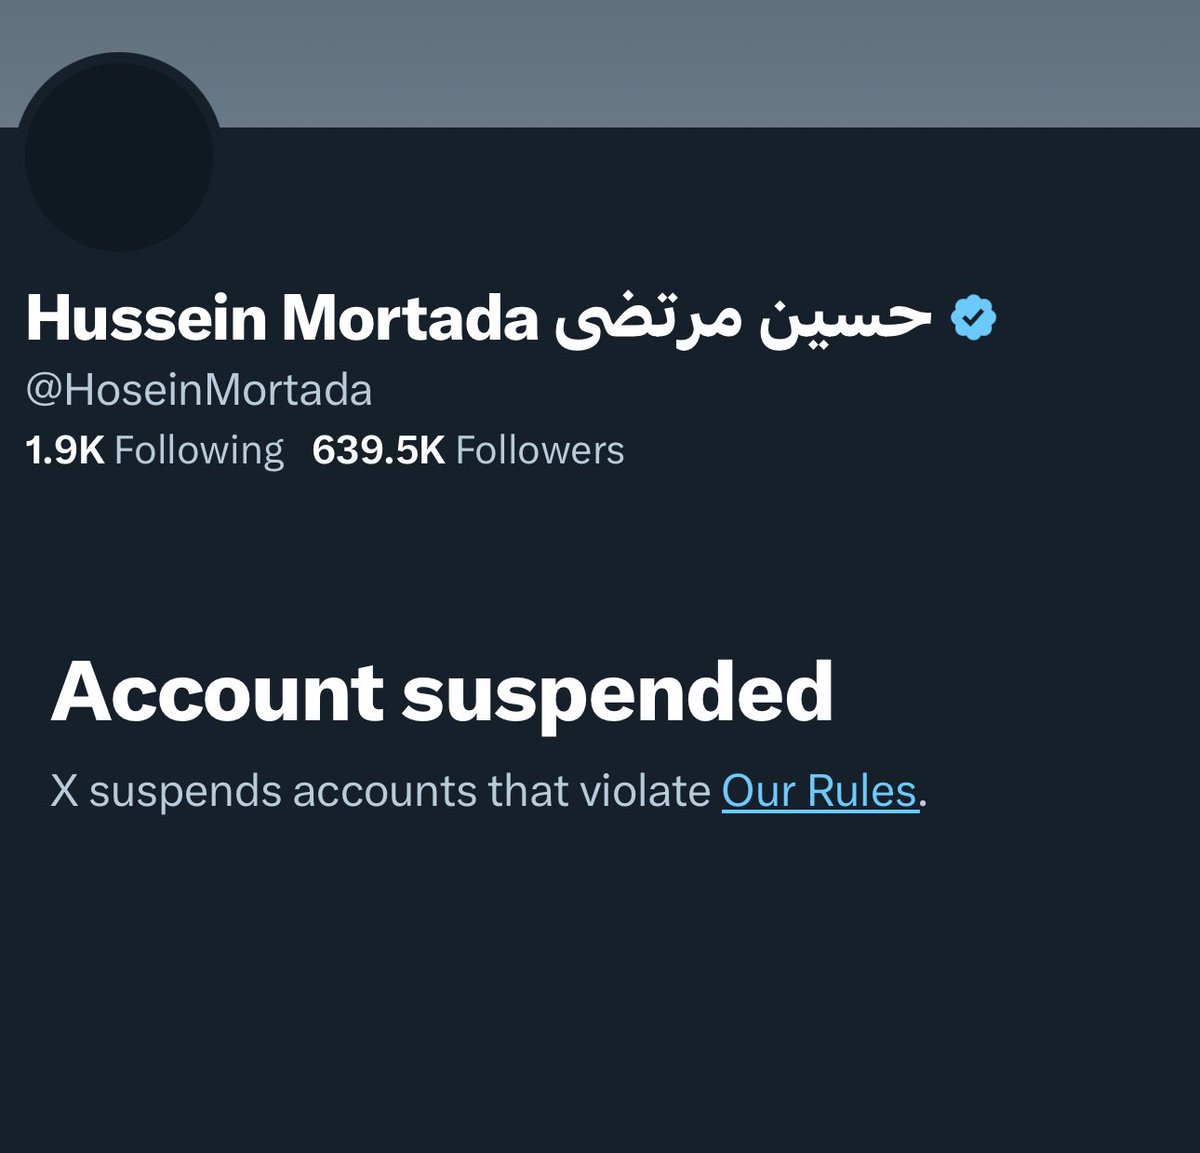 Twitter has suspended two of the most important journalists in Lebanon that are covering the war Ali Shoeib (@alishoeib1970) and Hussein Mortada (@HoseinMortada). This is an attack by Twitter on Lebanese free speech and its press. They must be reinstated immediately.